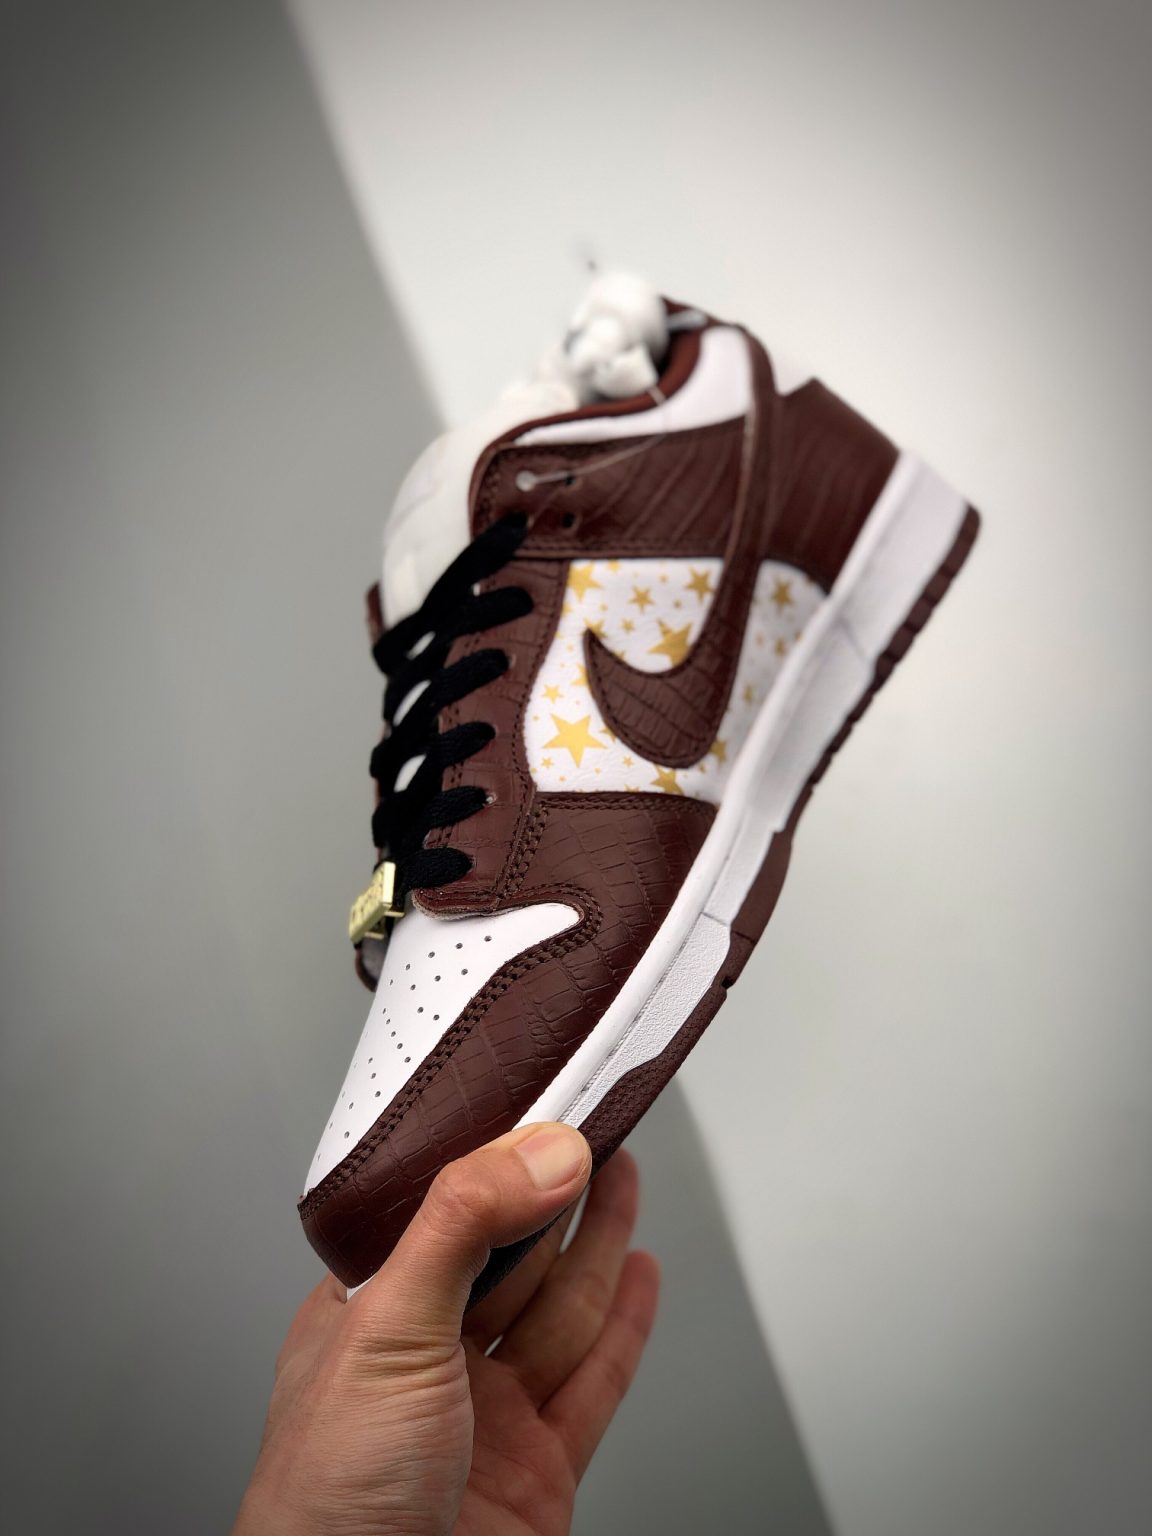 Supreme x Nike SB Dunk Low Stars Barkroot Brown For Sale – Sneaker Hello